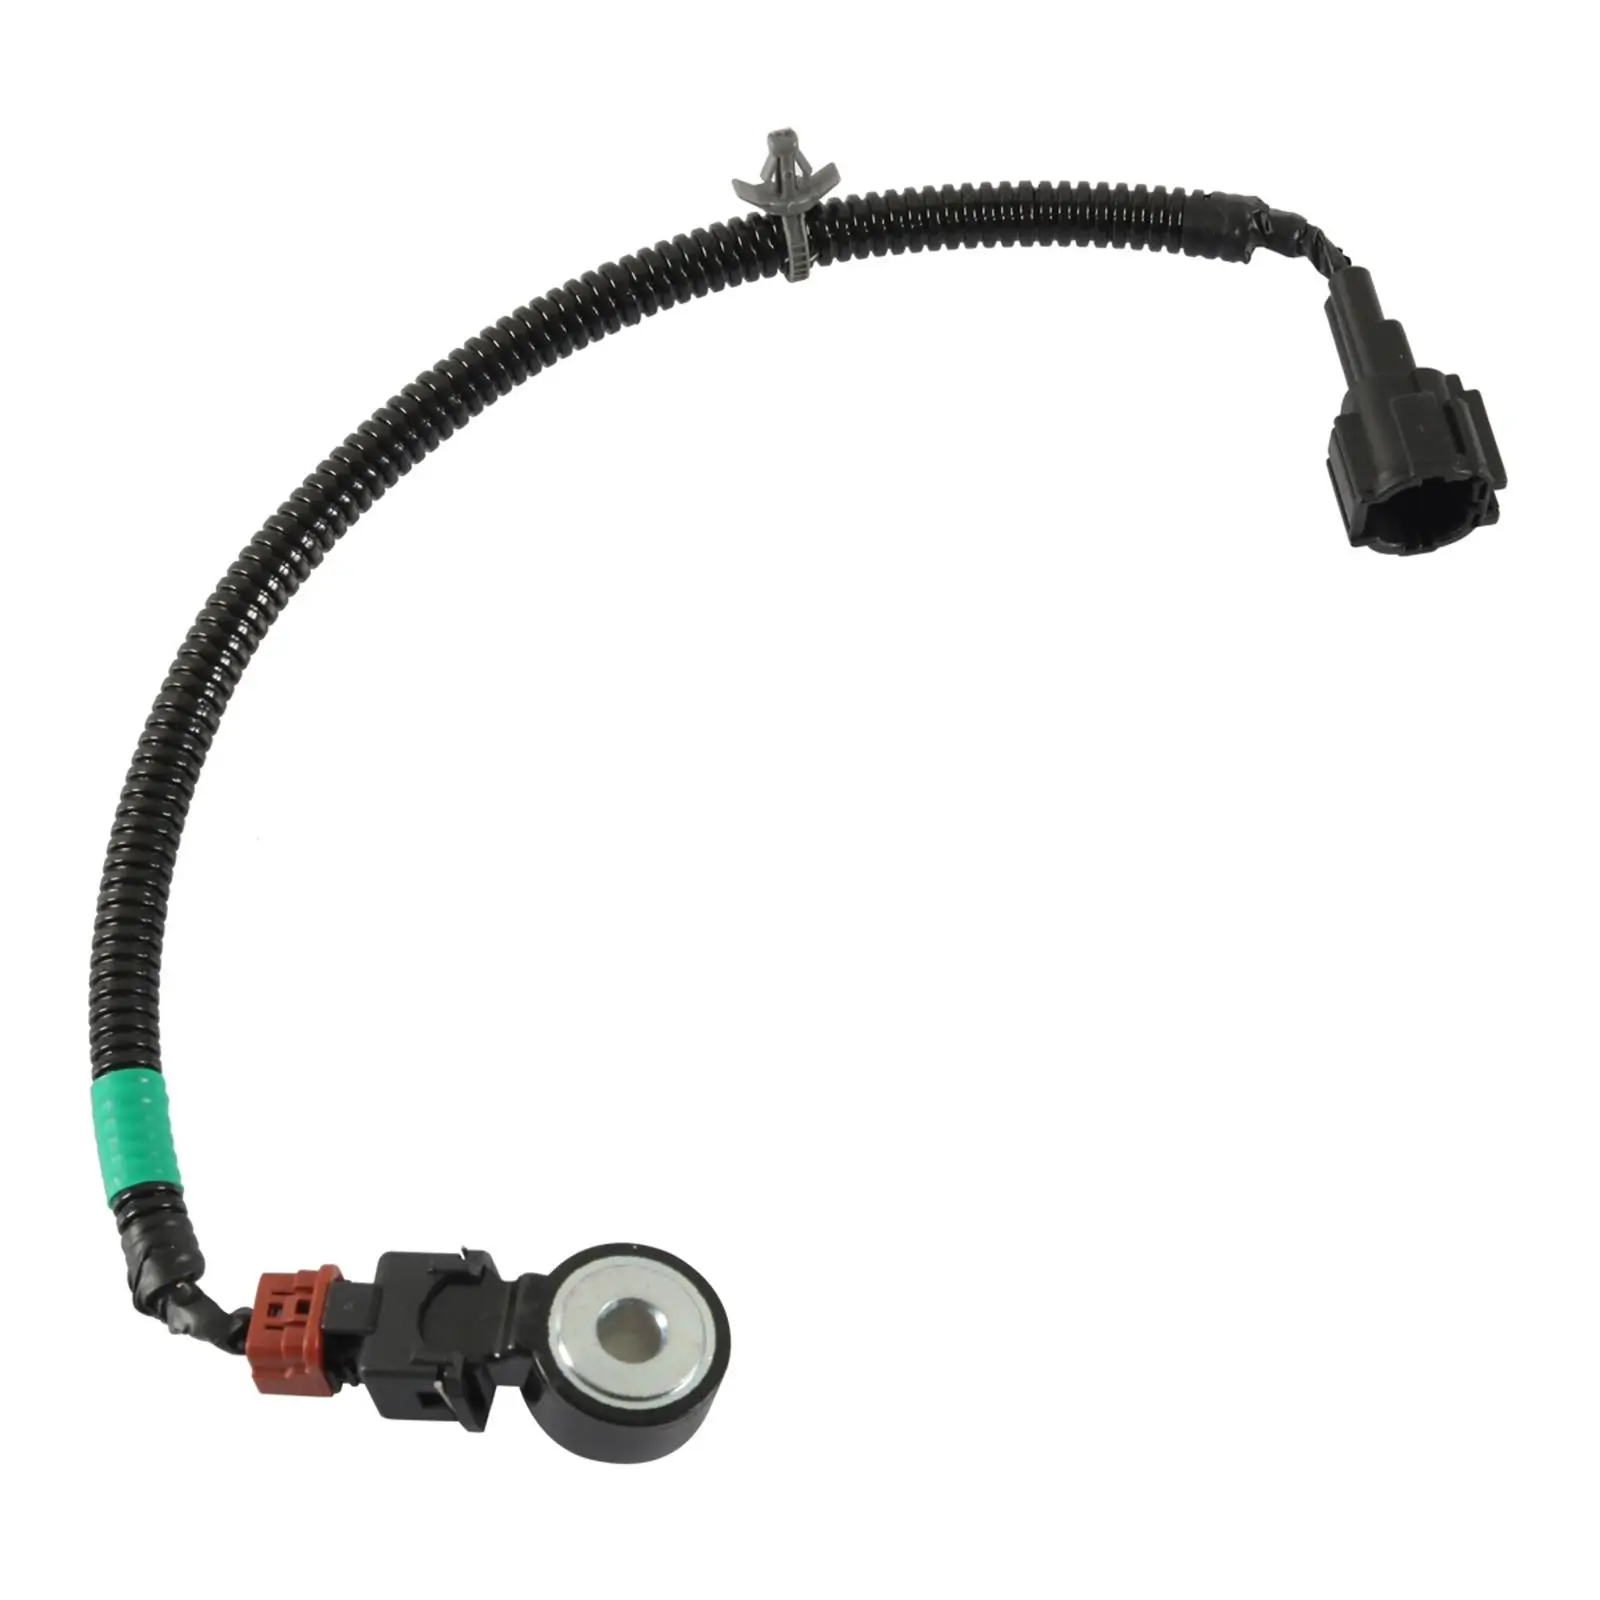 Engine Knock Sensor and Wire Harness 2407931U01 for Accessories Parts Replace Easy to Install